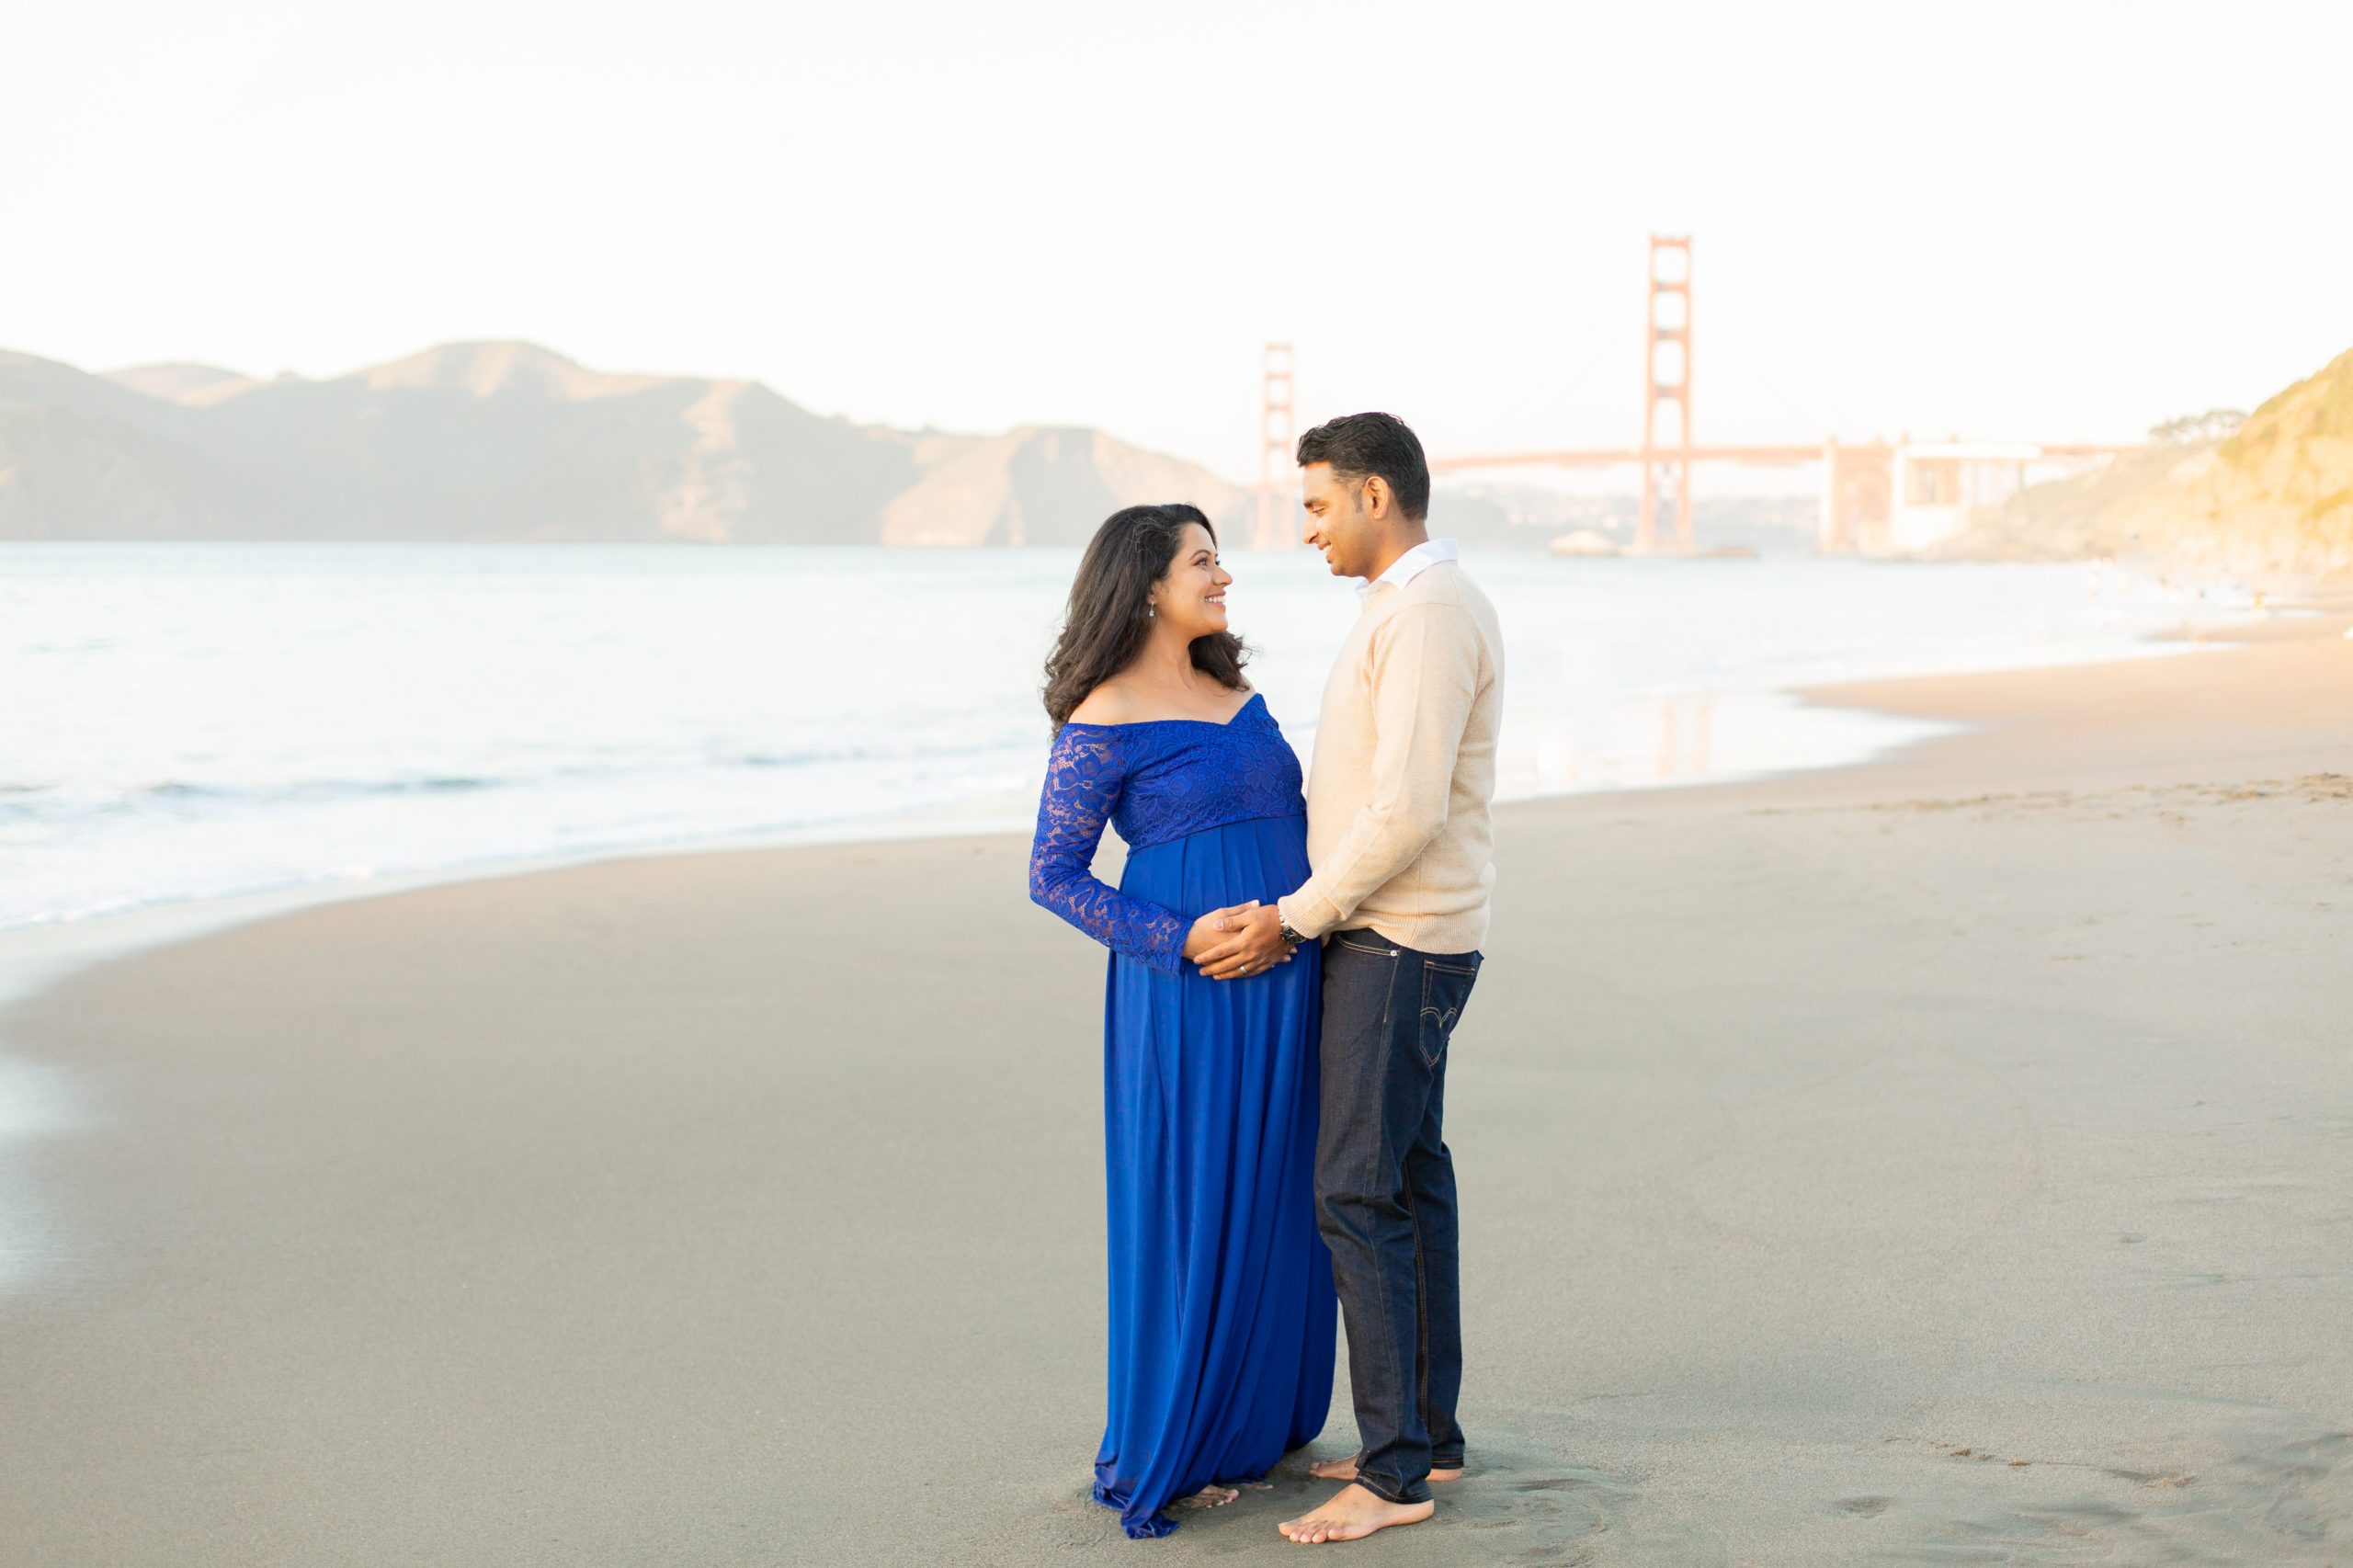 Pregnant woman and her husband embrace each other in on a beach in San Francisco with the Golden Gate Bridge in the background. The woman and man are Indian, both with dark hair. She is wearing a long blue dress and he is wearing a white shirt tan sweater and slacks.